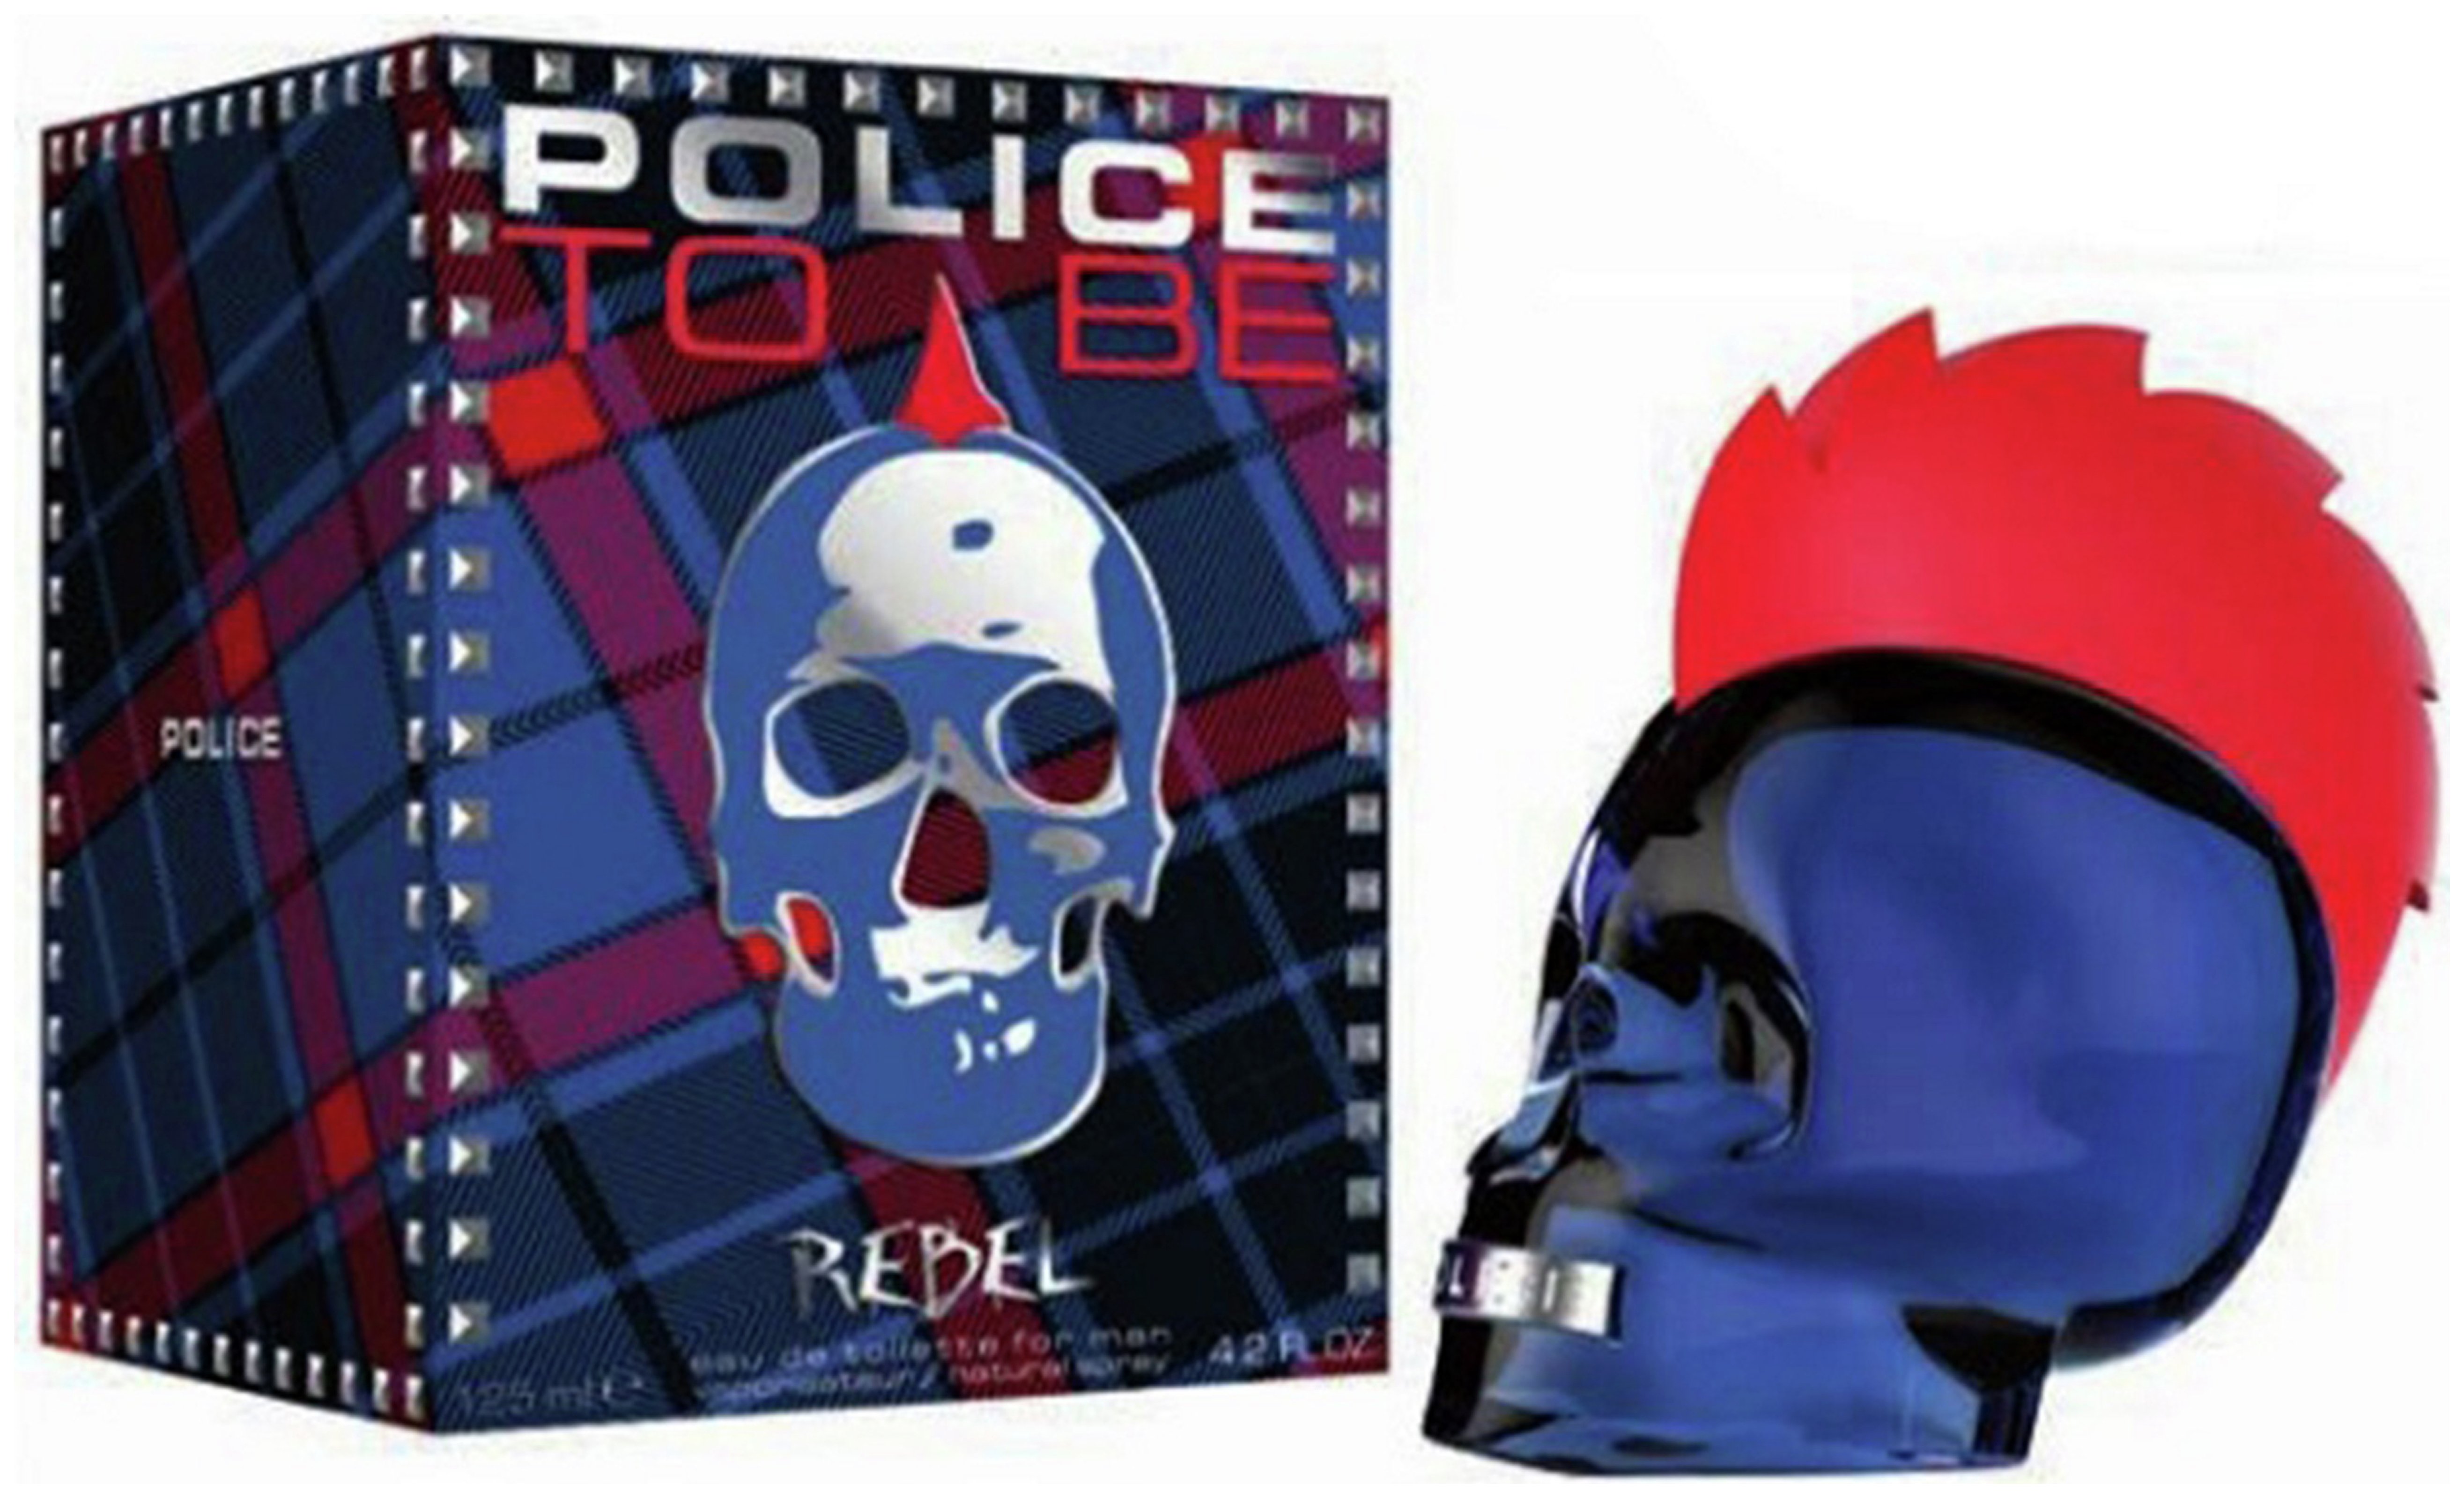 Police To Be Rebel Limited Edition Eau de Toilette - 125ml